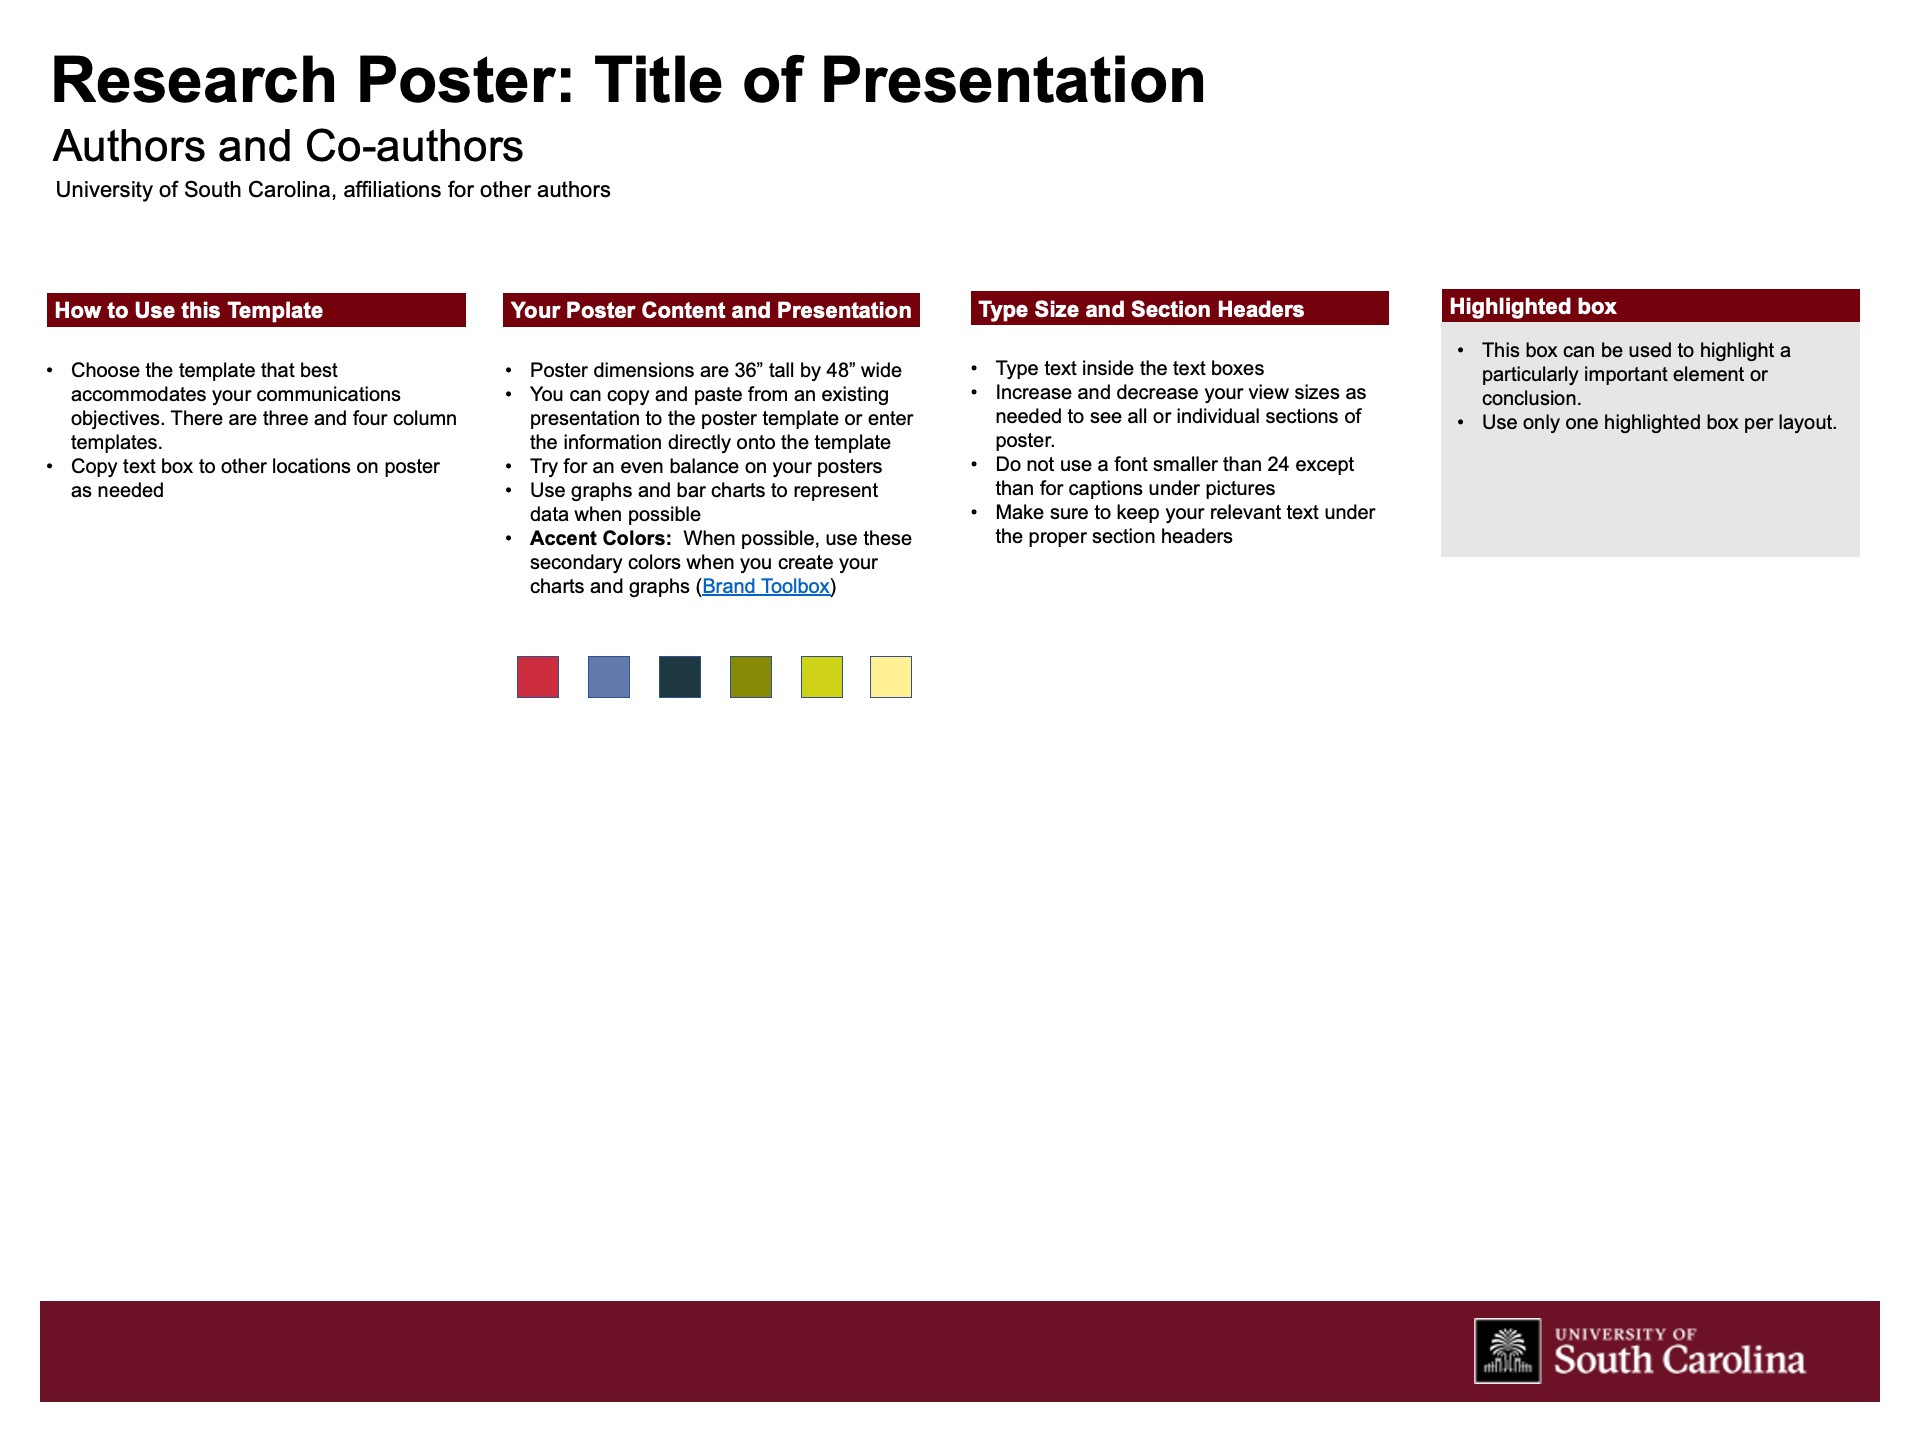 Research Poster 1 